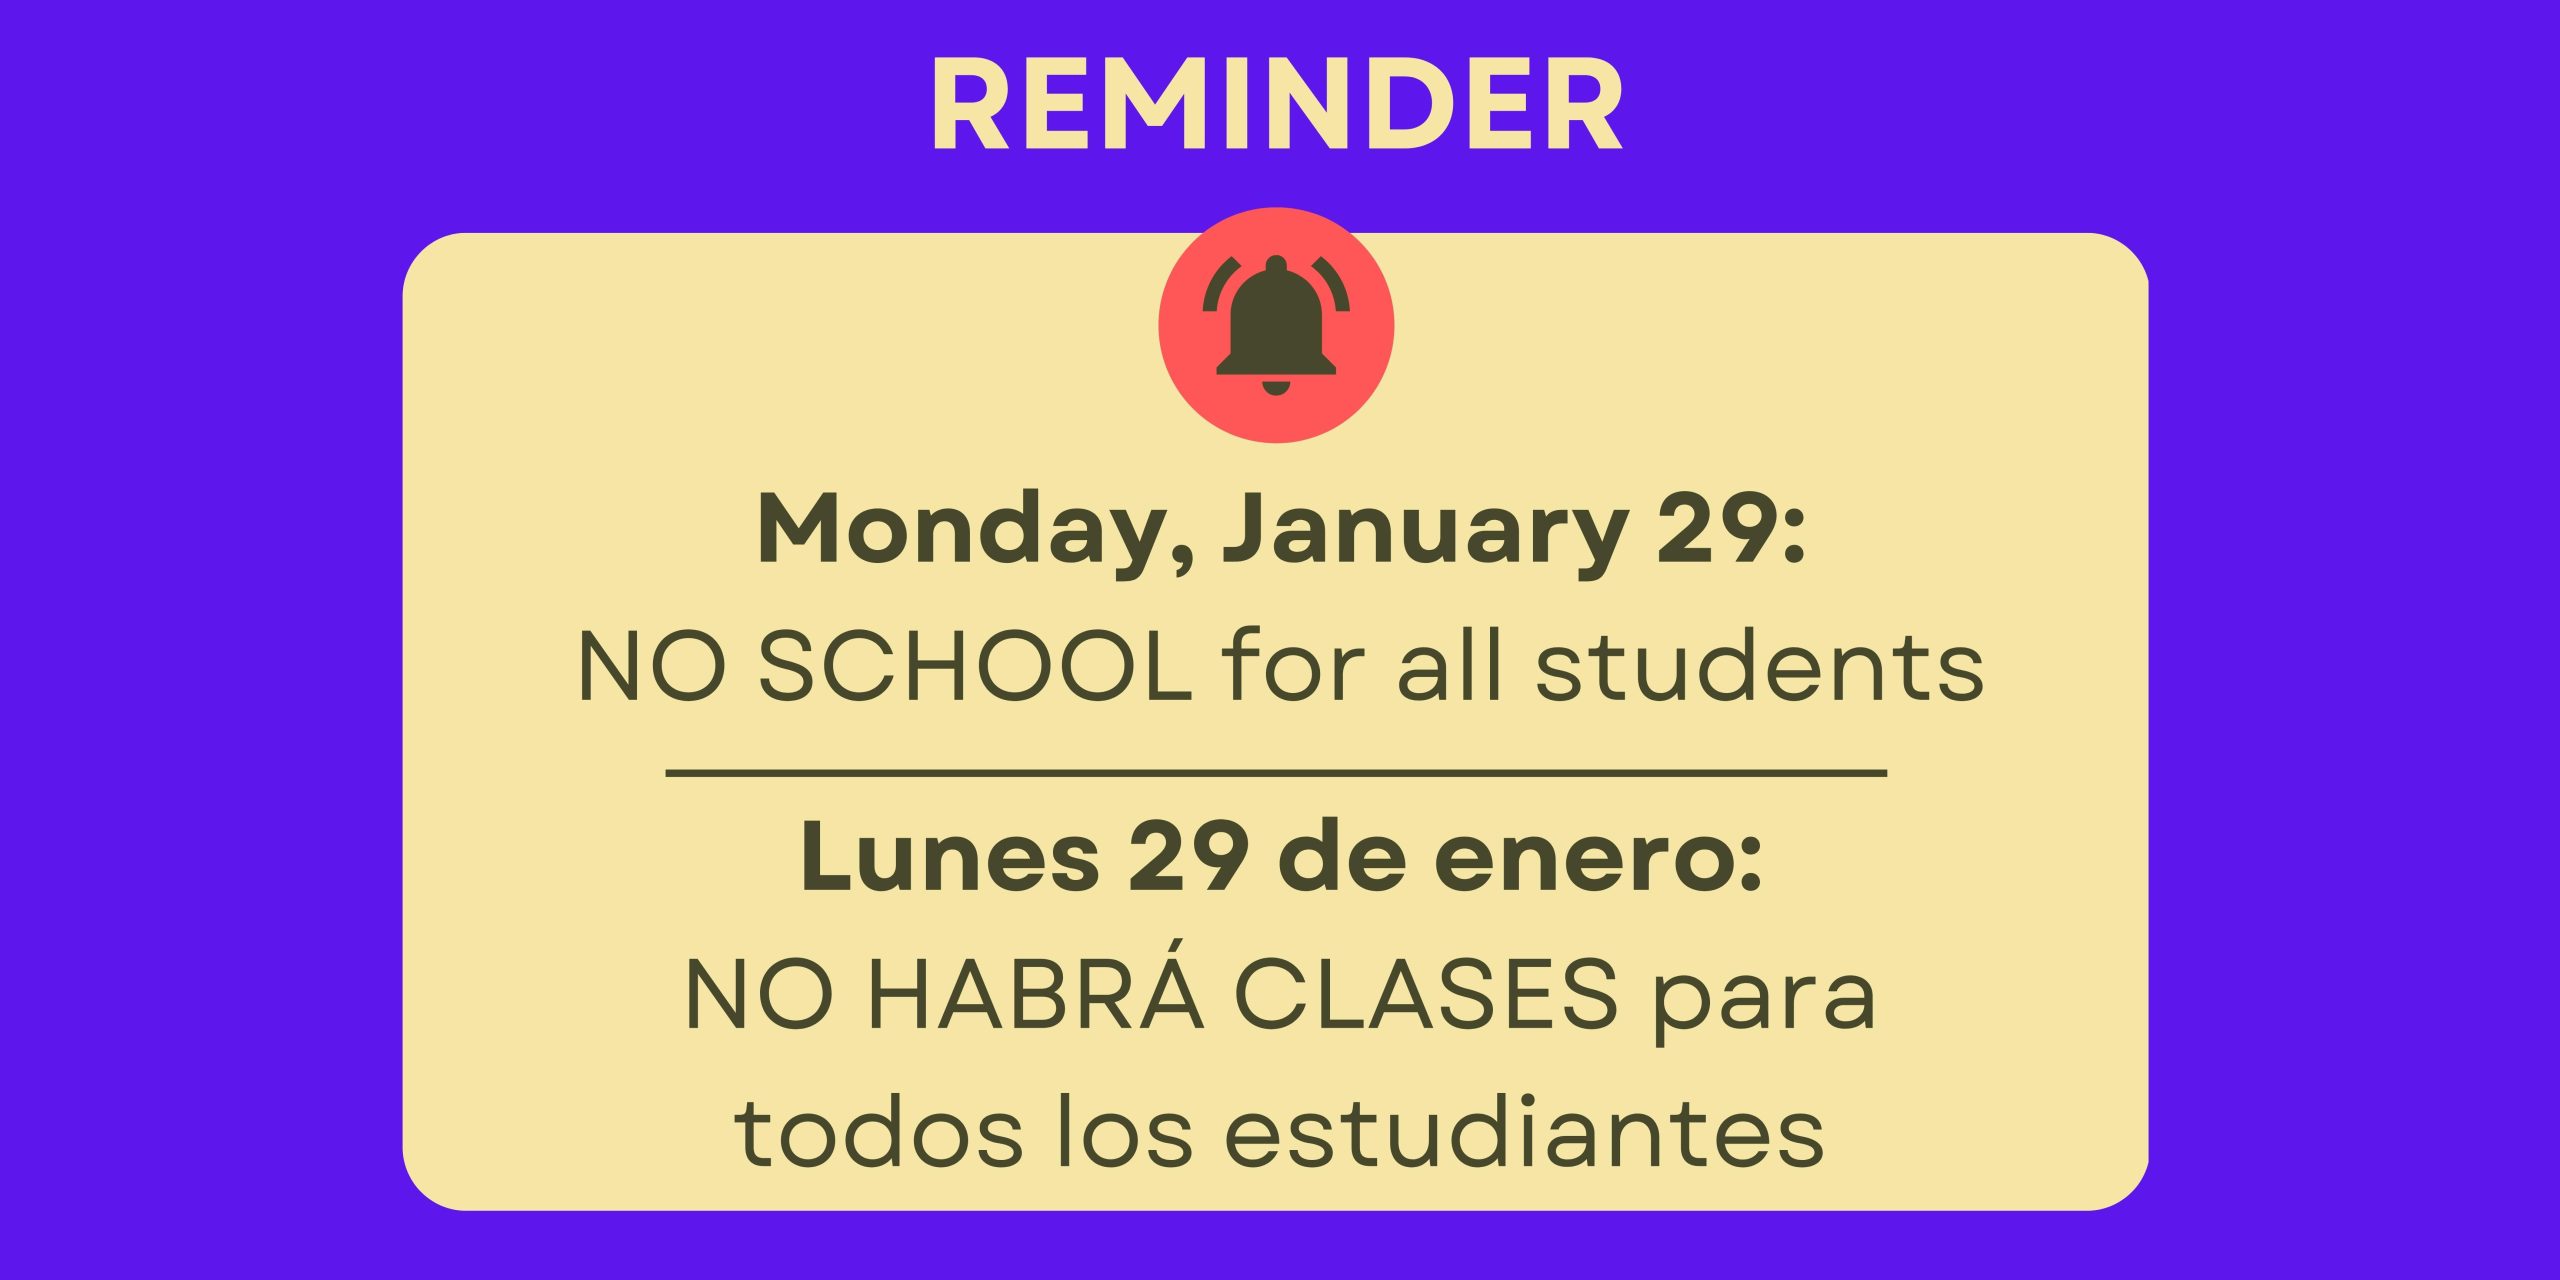 Royal blue background with light yellow rectangle inside. At top in yellow text says, "Reminder" with a black alarm bell in a red circle underneath. Black text inside the yellow rectangle says, "Monday, January 29: NO SCHOOL for all students. Lunes 29 de enero: NO HAY CLASES para todos los estudiantes"